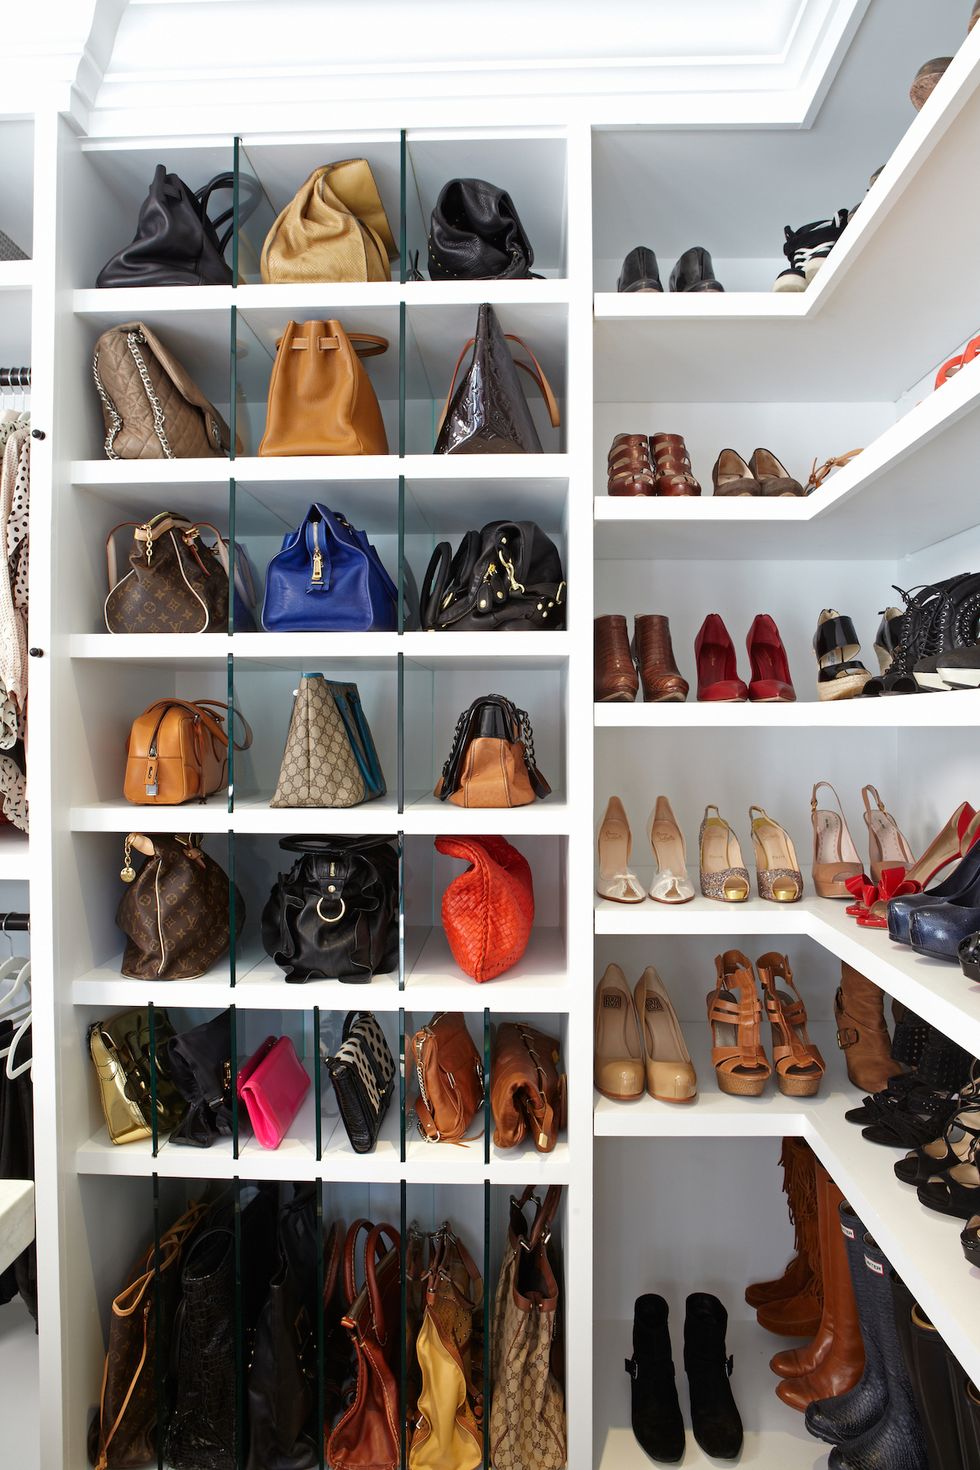 35 Best Closet Organization Ideas for a Functional Space